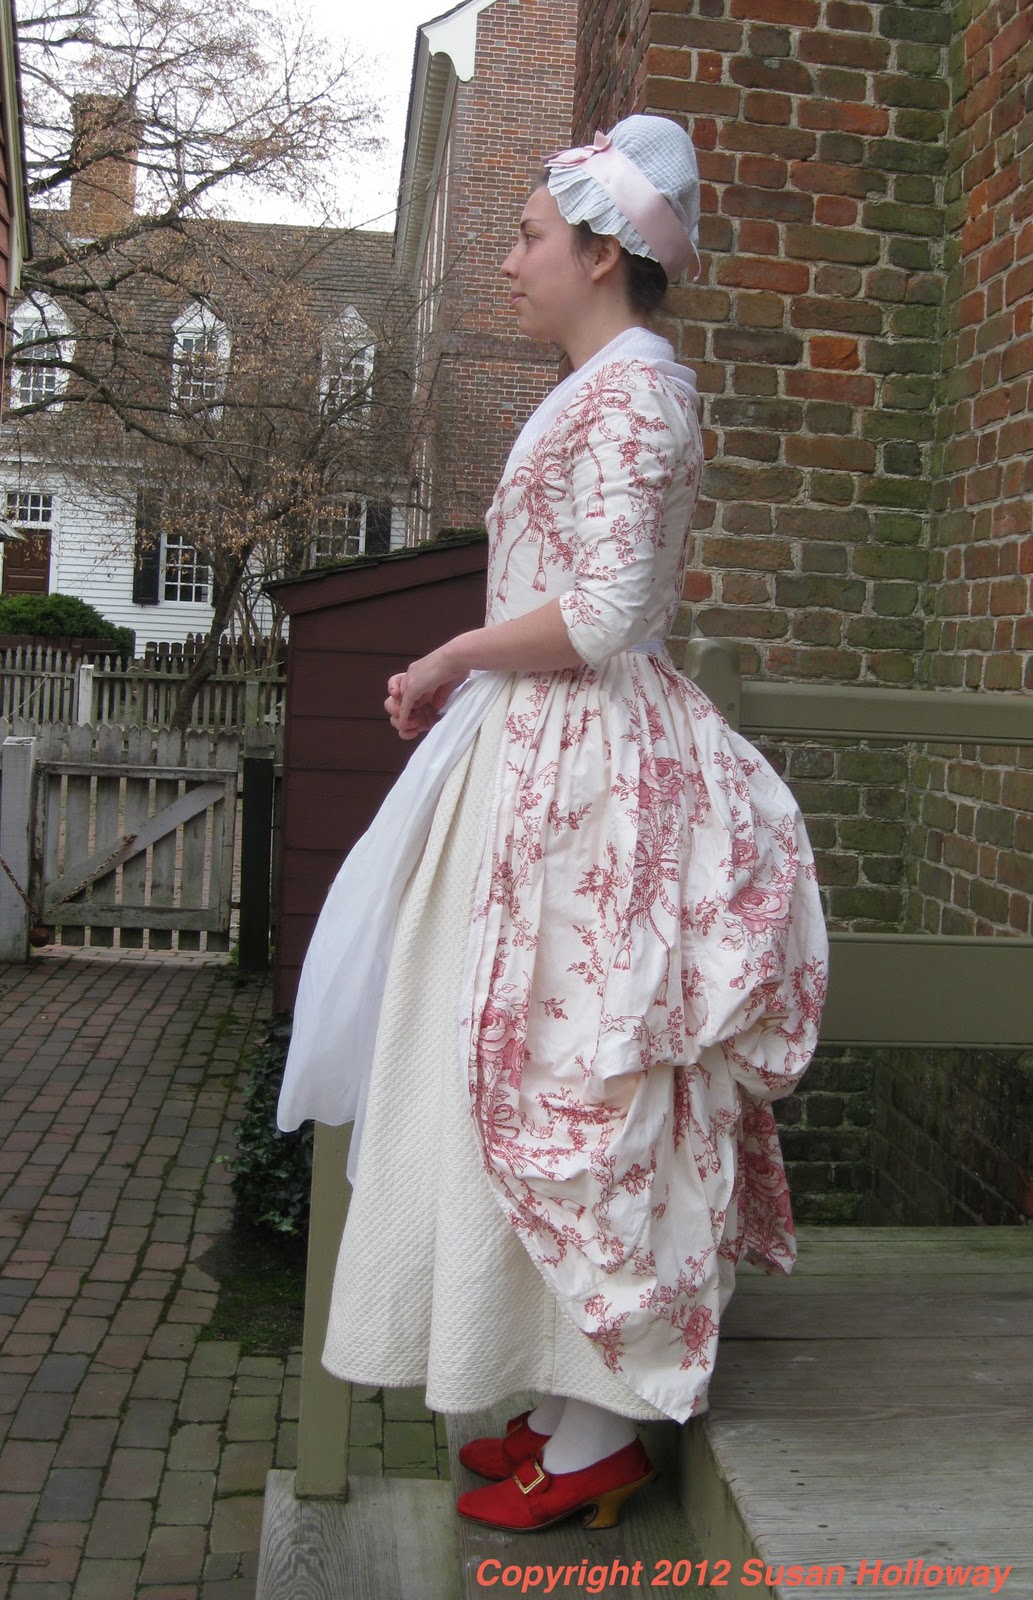 Constructing a dress of c.1775: The bodice | Serena Dyer